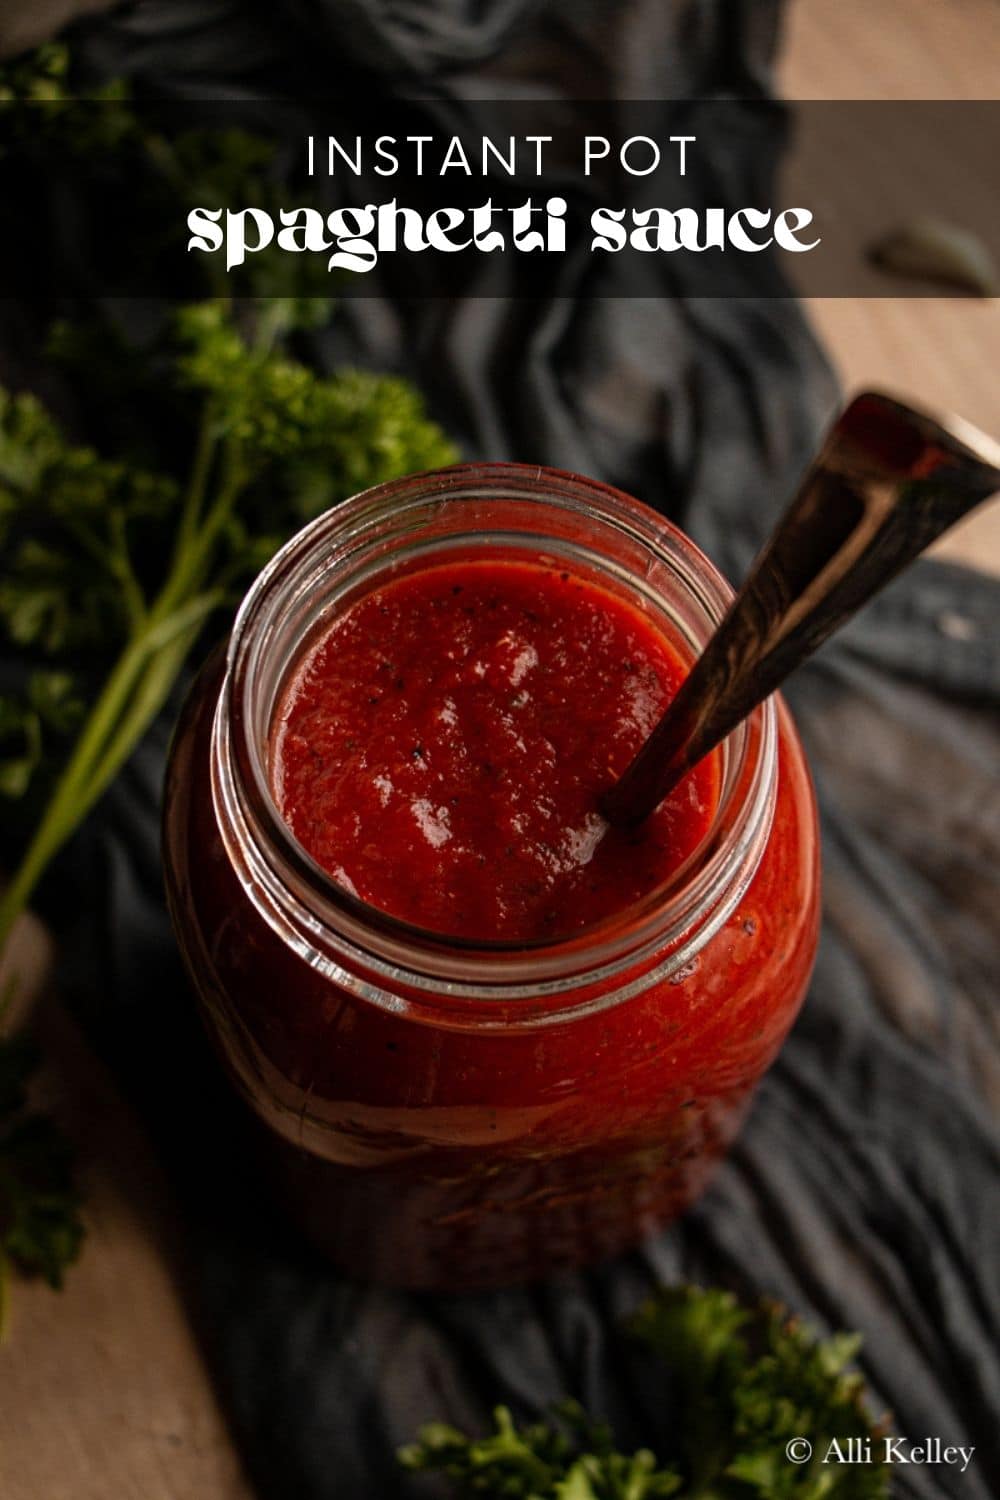 When looking for a quick and delicious dinner, this Instant Pot marinara is the perfect option! My Instant Pot tomato sauce recipe is an absolute classic - it has all the flavor of a slow-simmered sauce but takes minutes to make. Full of tangy tomatoes, onions, and herbs, this sauce is ideal for pasta dishes or as a dipping sauce.